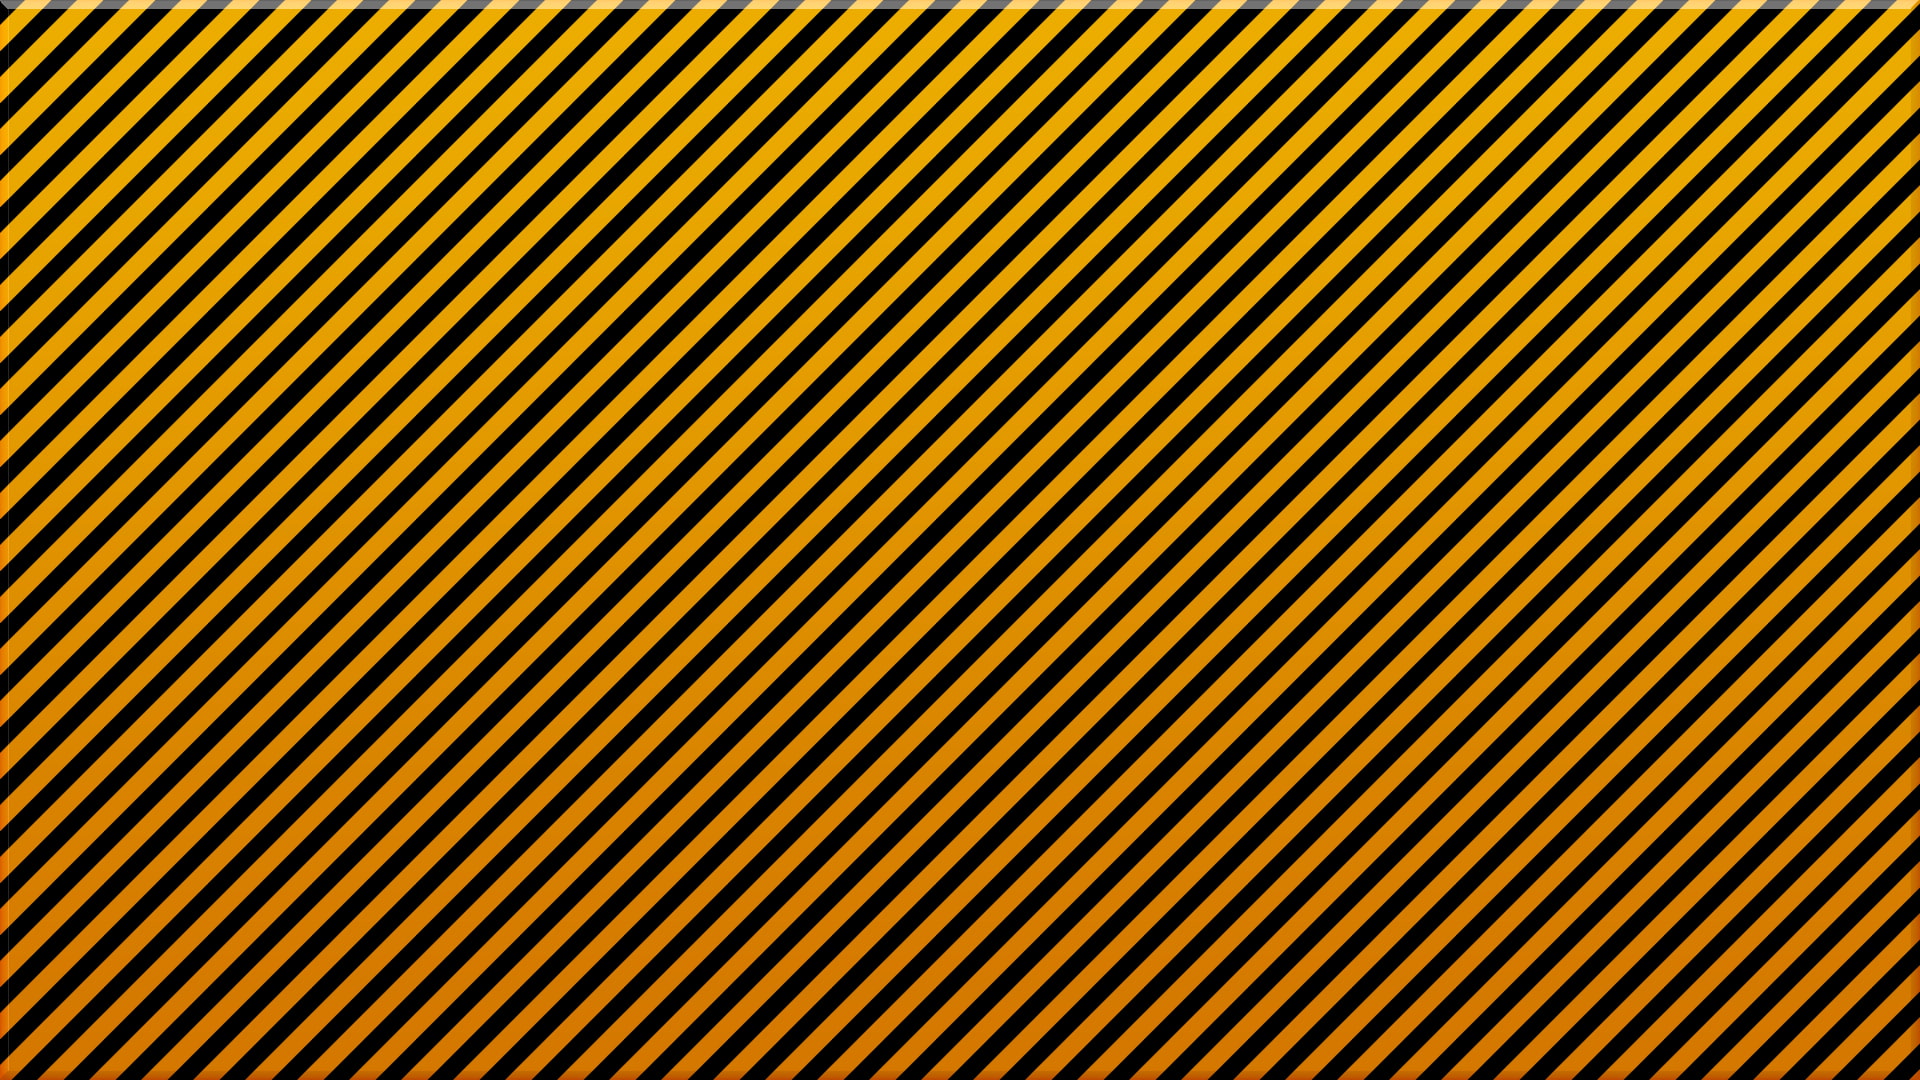 warning signs, backgrounds, full frame, striped, pattern, no people